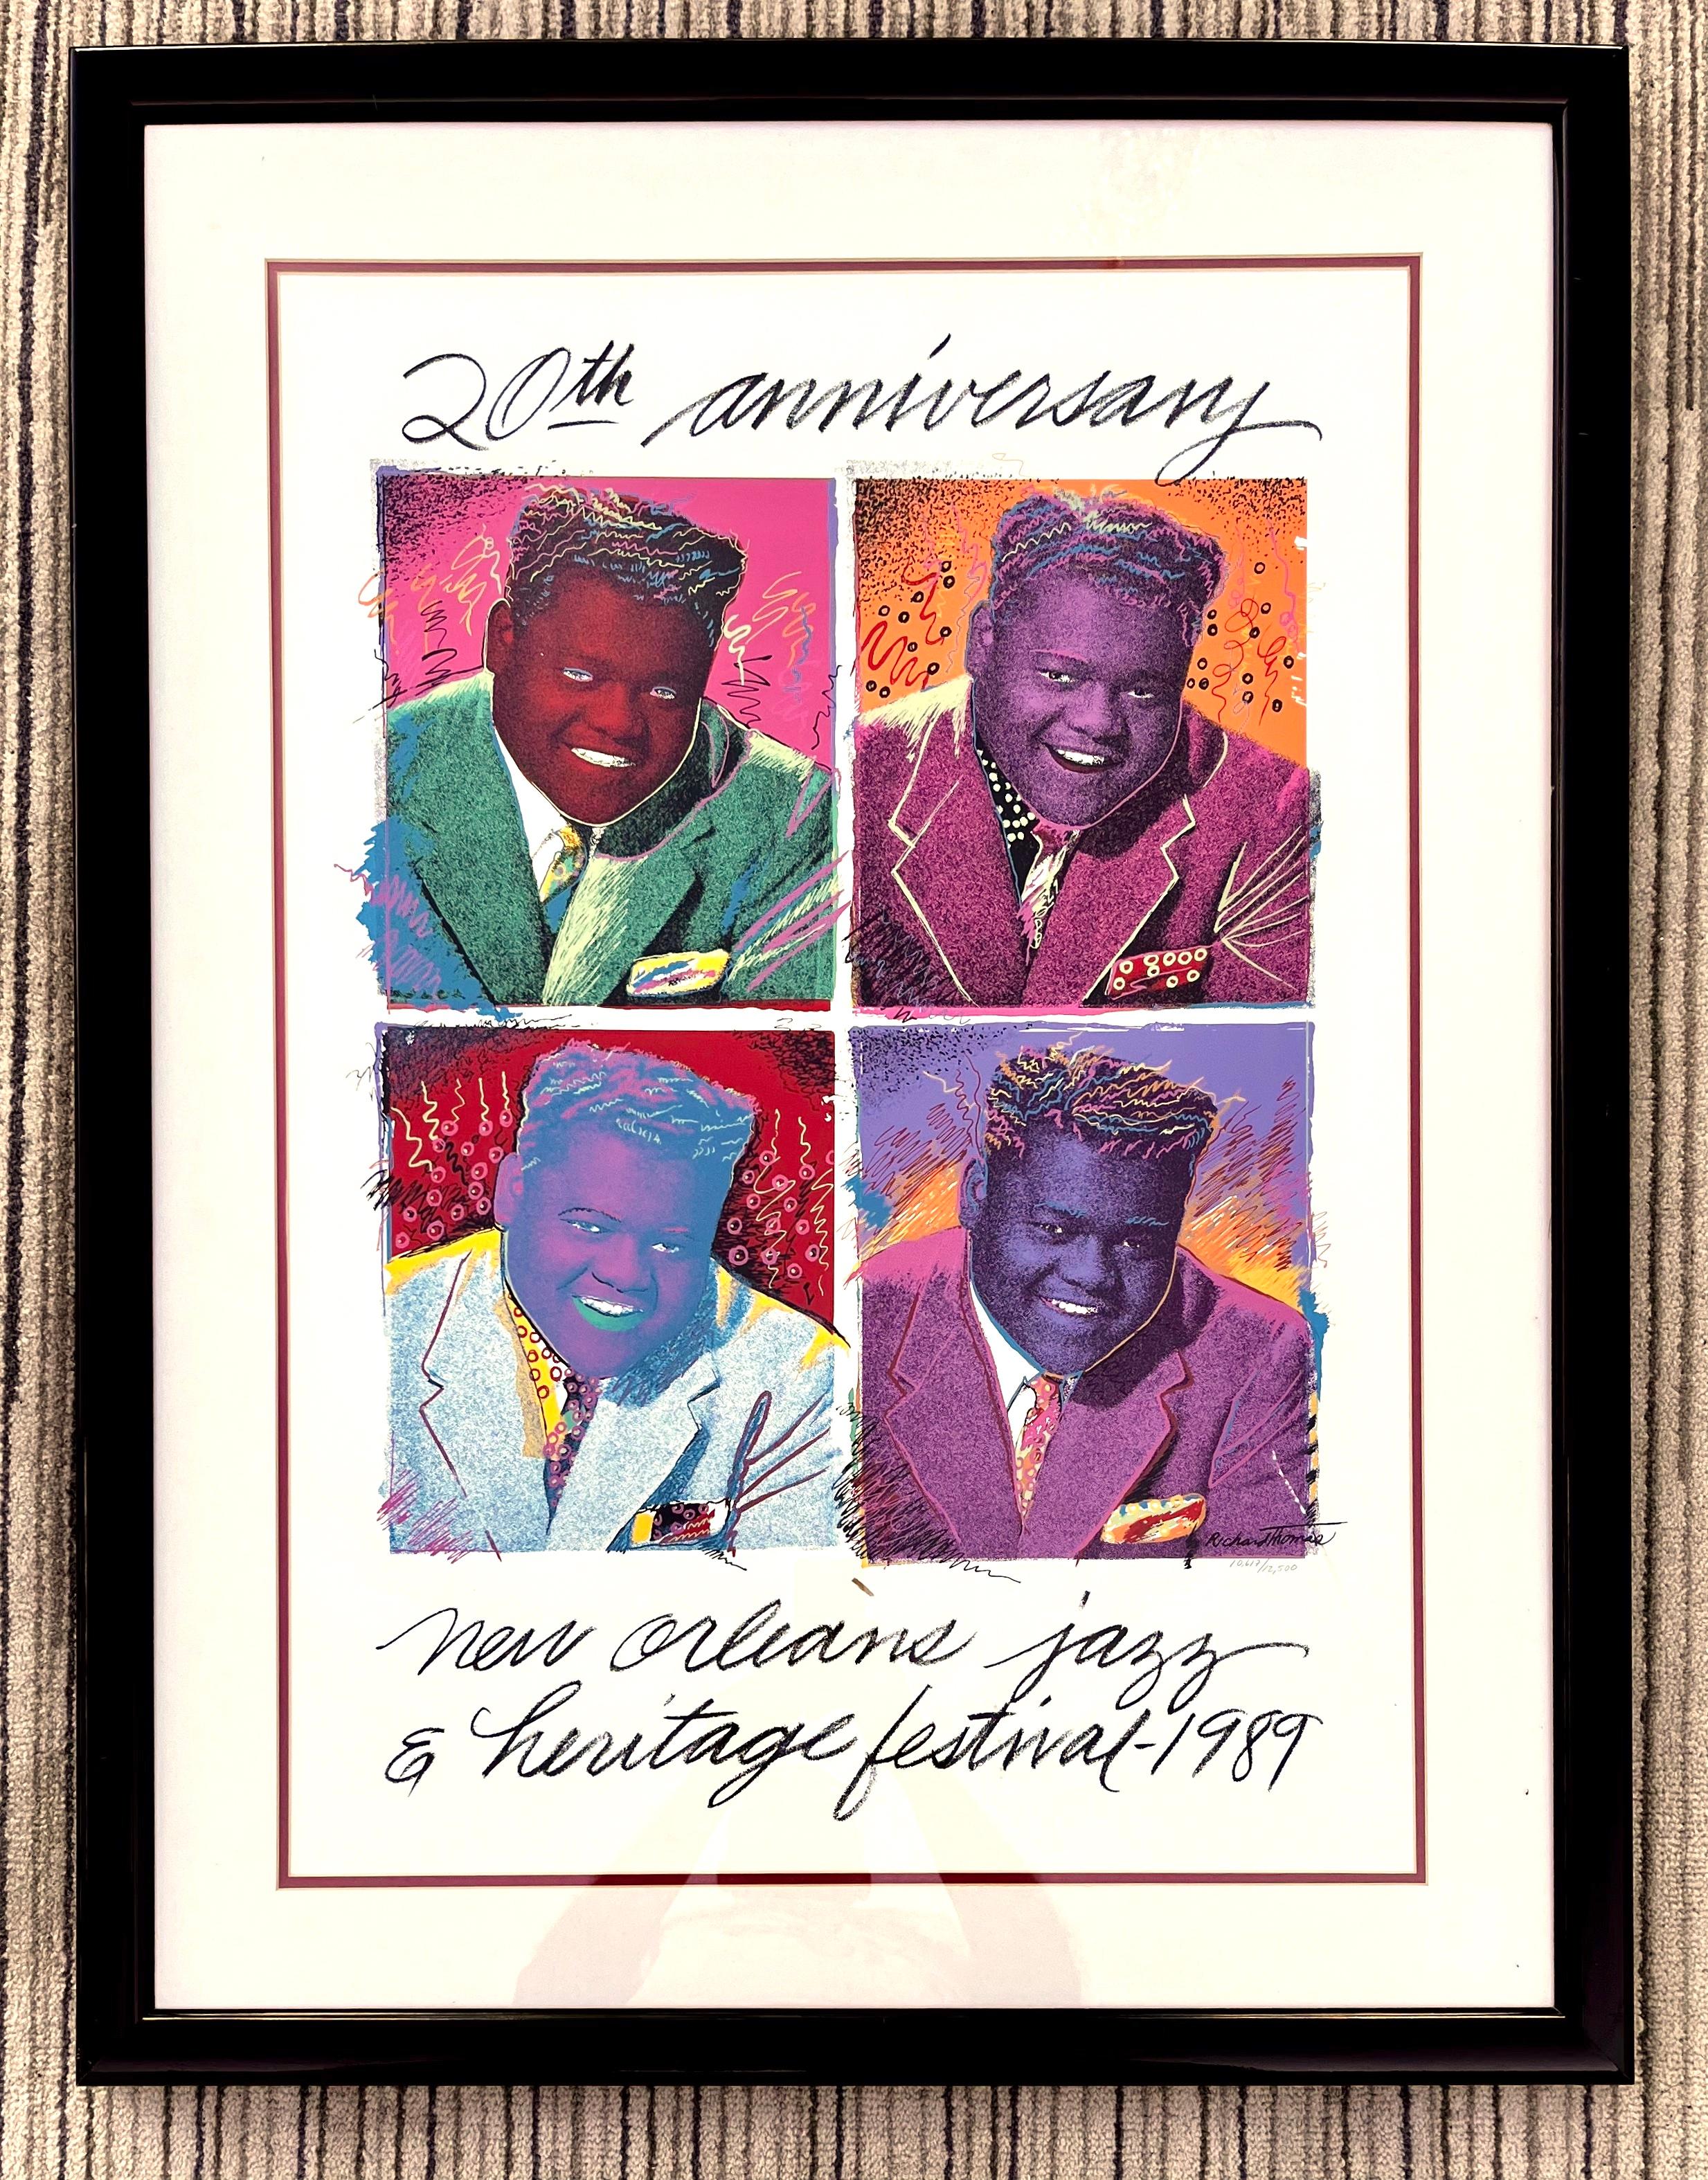 Vintage New Orleans 1989 Jazz Festival 20 Anniversary Fats Domino Original Poster by Richard Thomas Numbered and framed. 
Fifteenth in the series by Richard Thomas. As significant a poster in the series as the '76, '80 and '85, Richard Thomas' pop